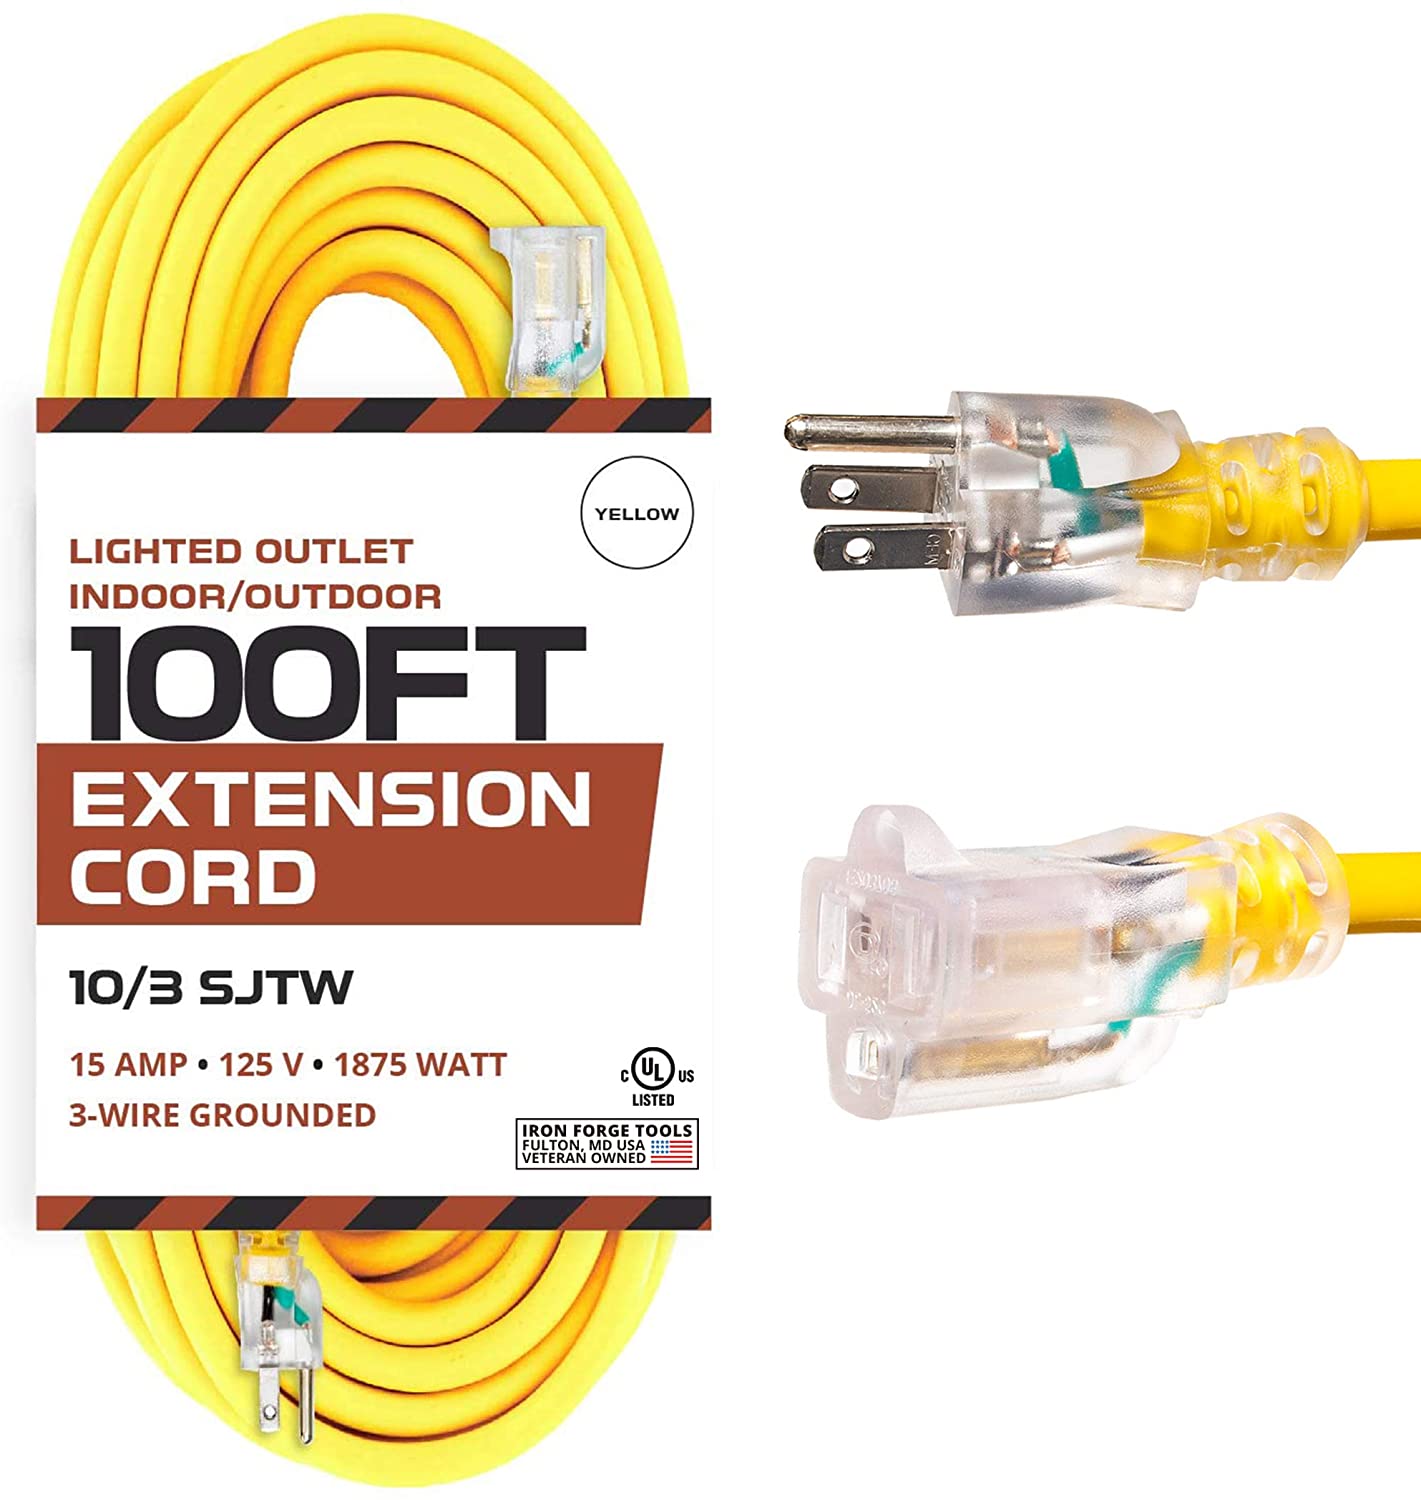 100 Foot Lighted Outdoor Extension Cord - 10 Gauge- Yellow - iron forge  tools